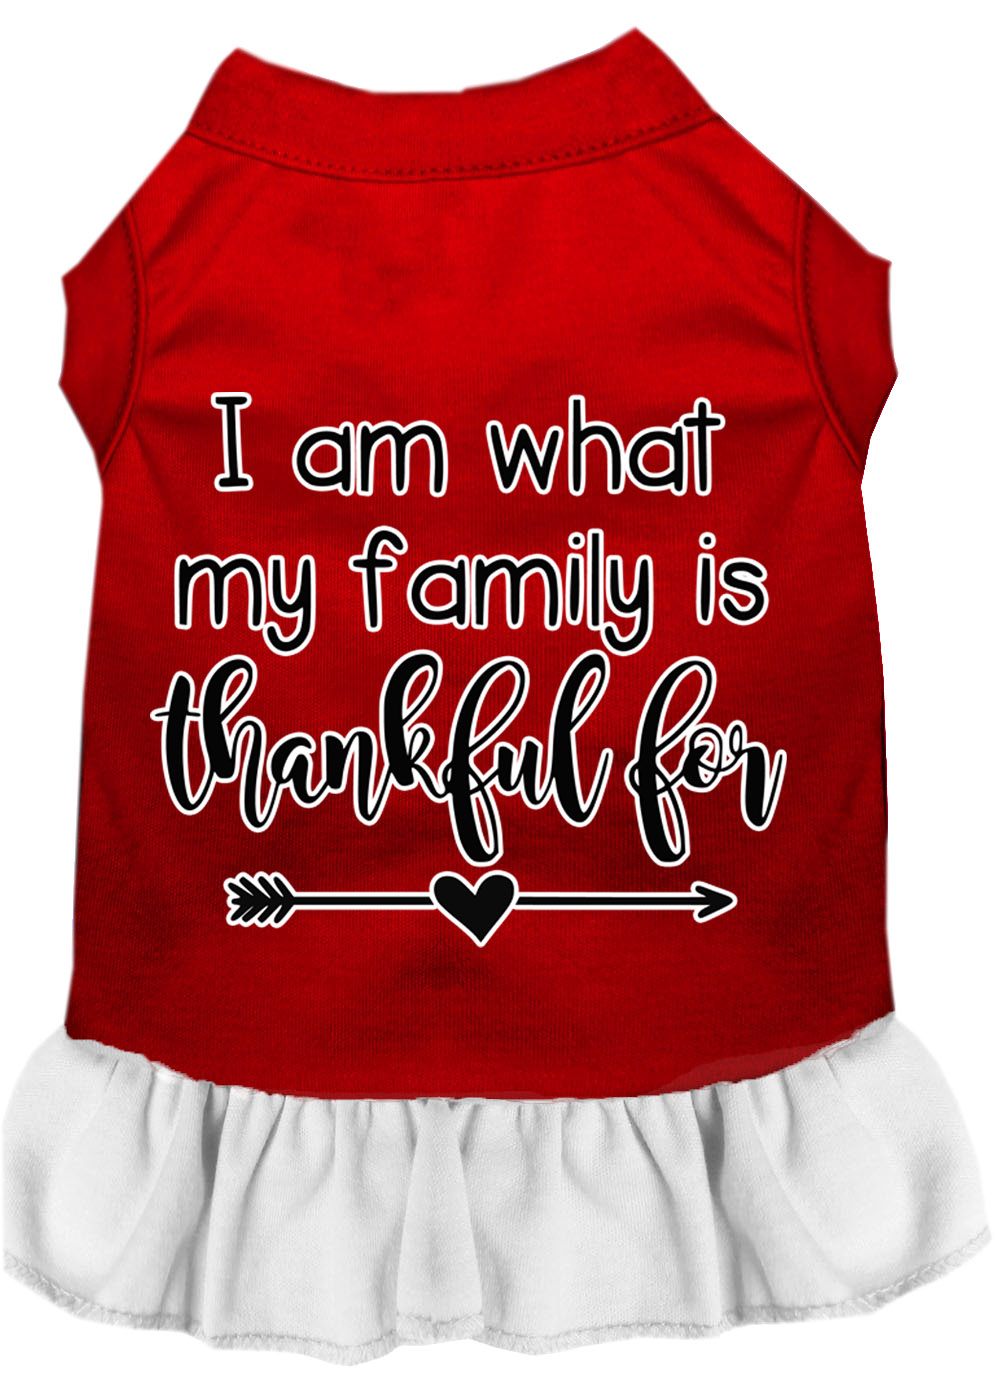 I Am What My Family is Thankful For Screen Print Dog Dress Red with White XS